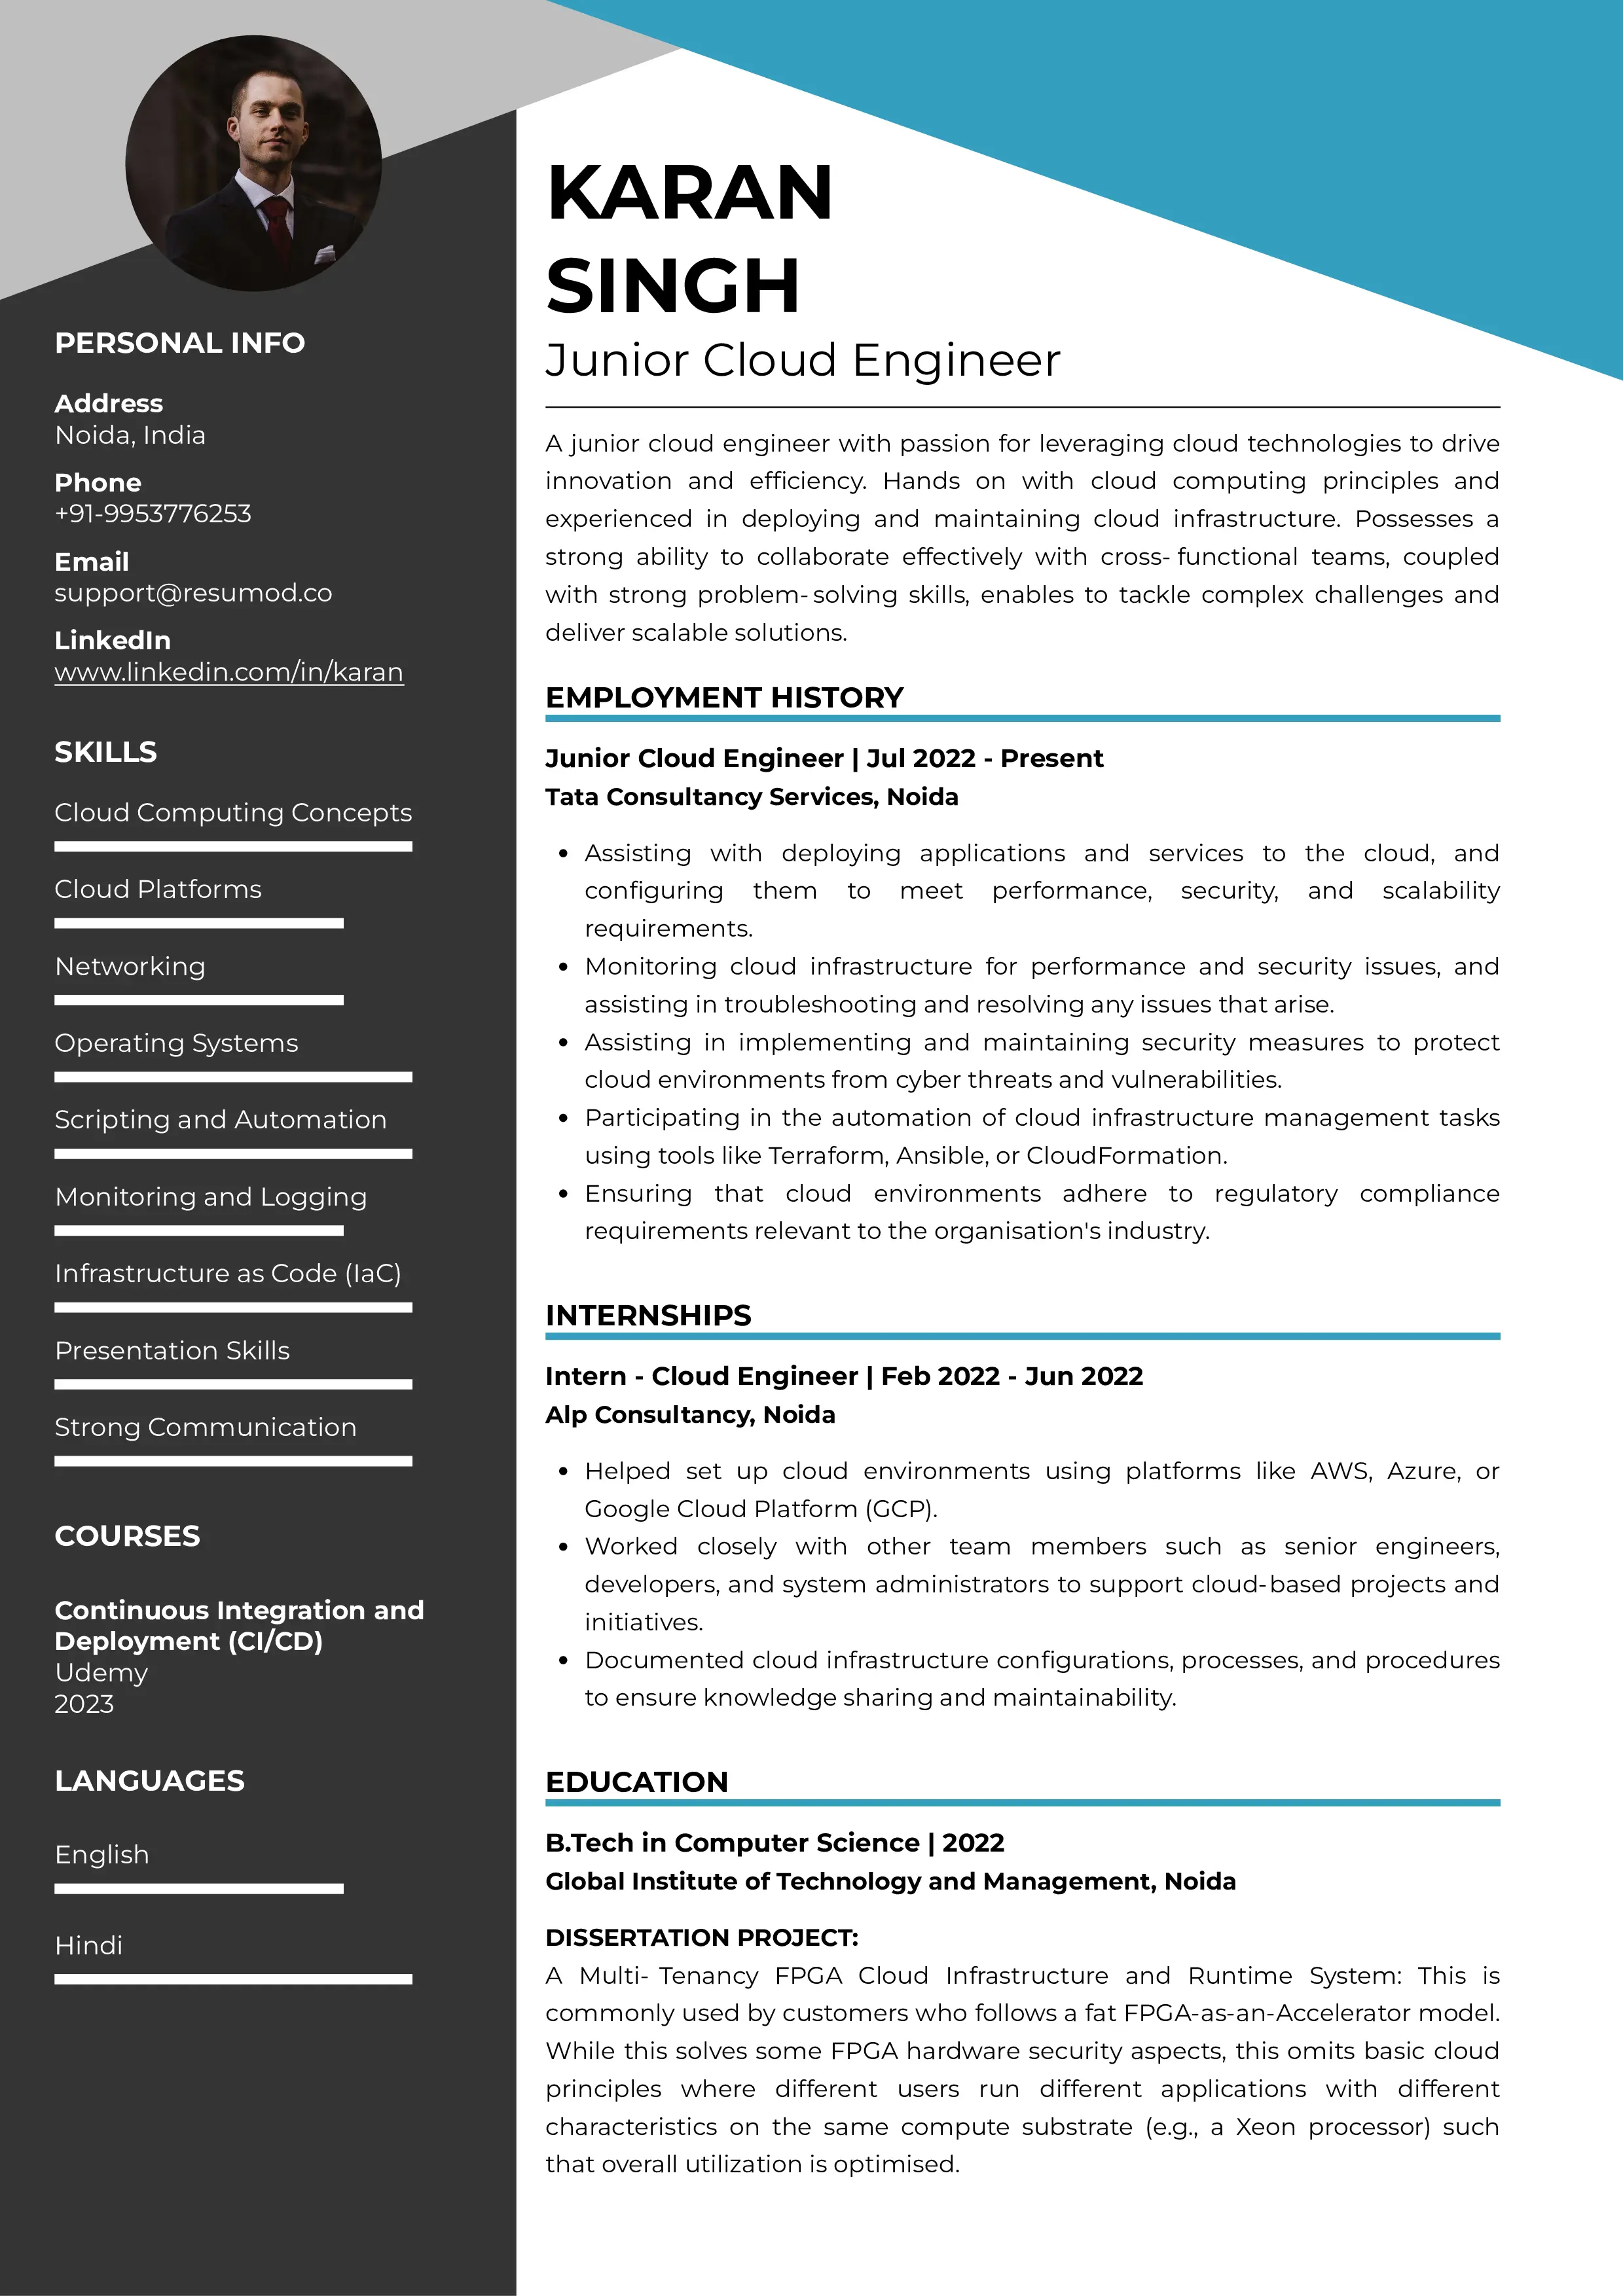 Sample Resume of Content Junior Cloud Engineer | Free Resume Templates & Samples on Resumod.co